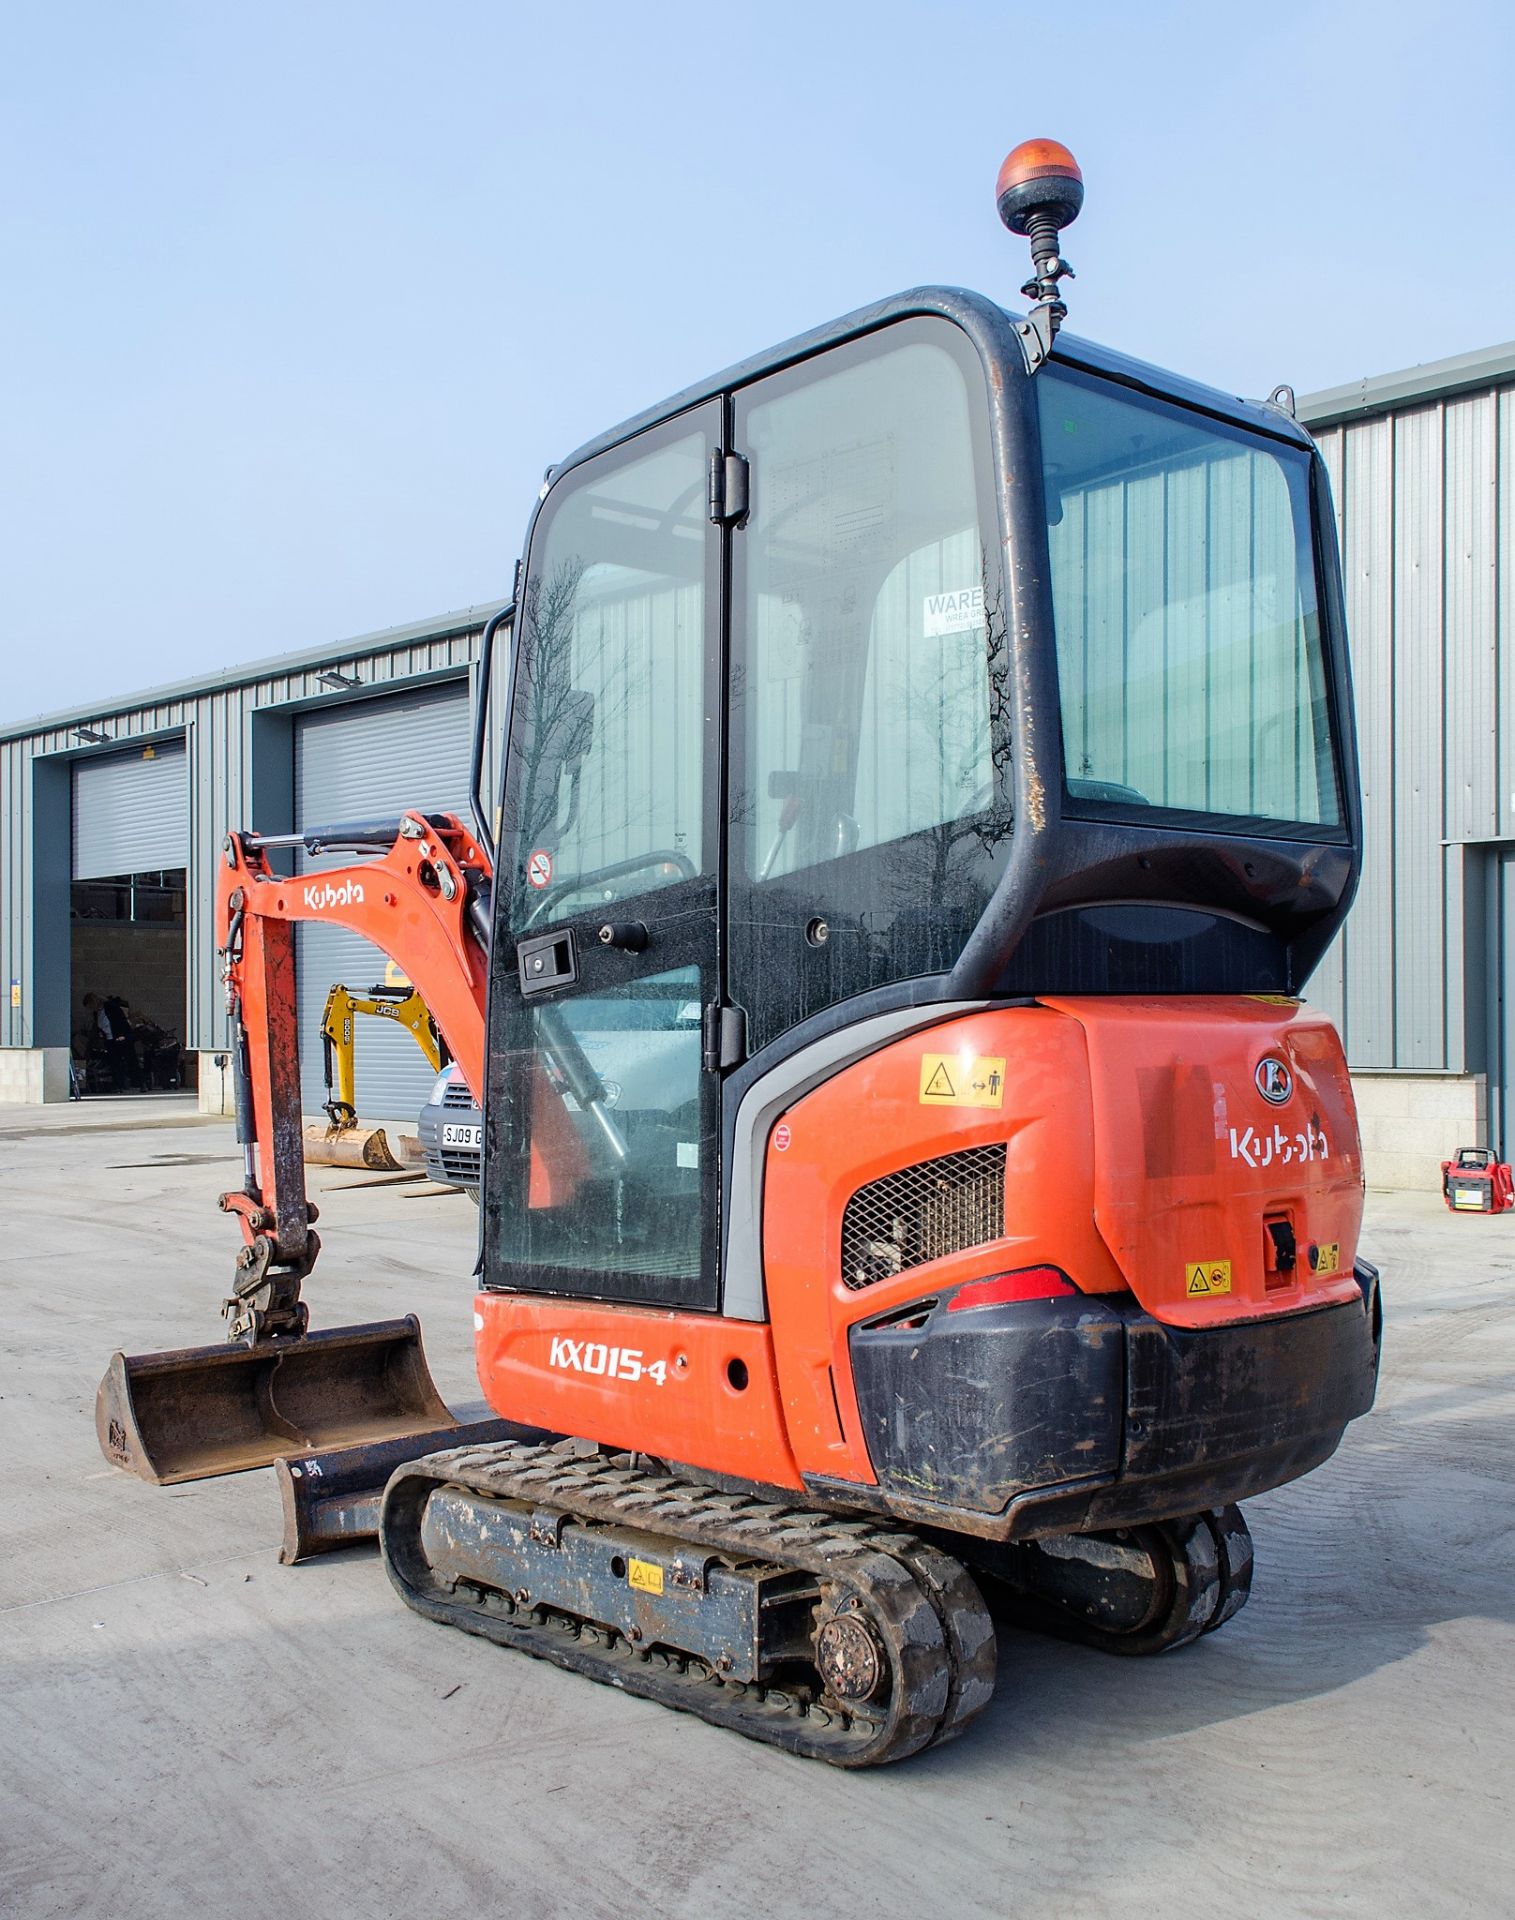 Kubota KX015-4 1.5 tonne rubber tracked excavator Year: 2014 S/N: 58181 Recorded Hours: 1616 - Image 4 of 21